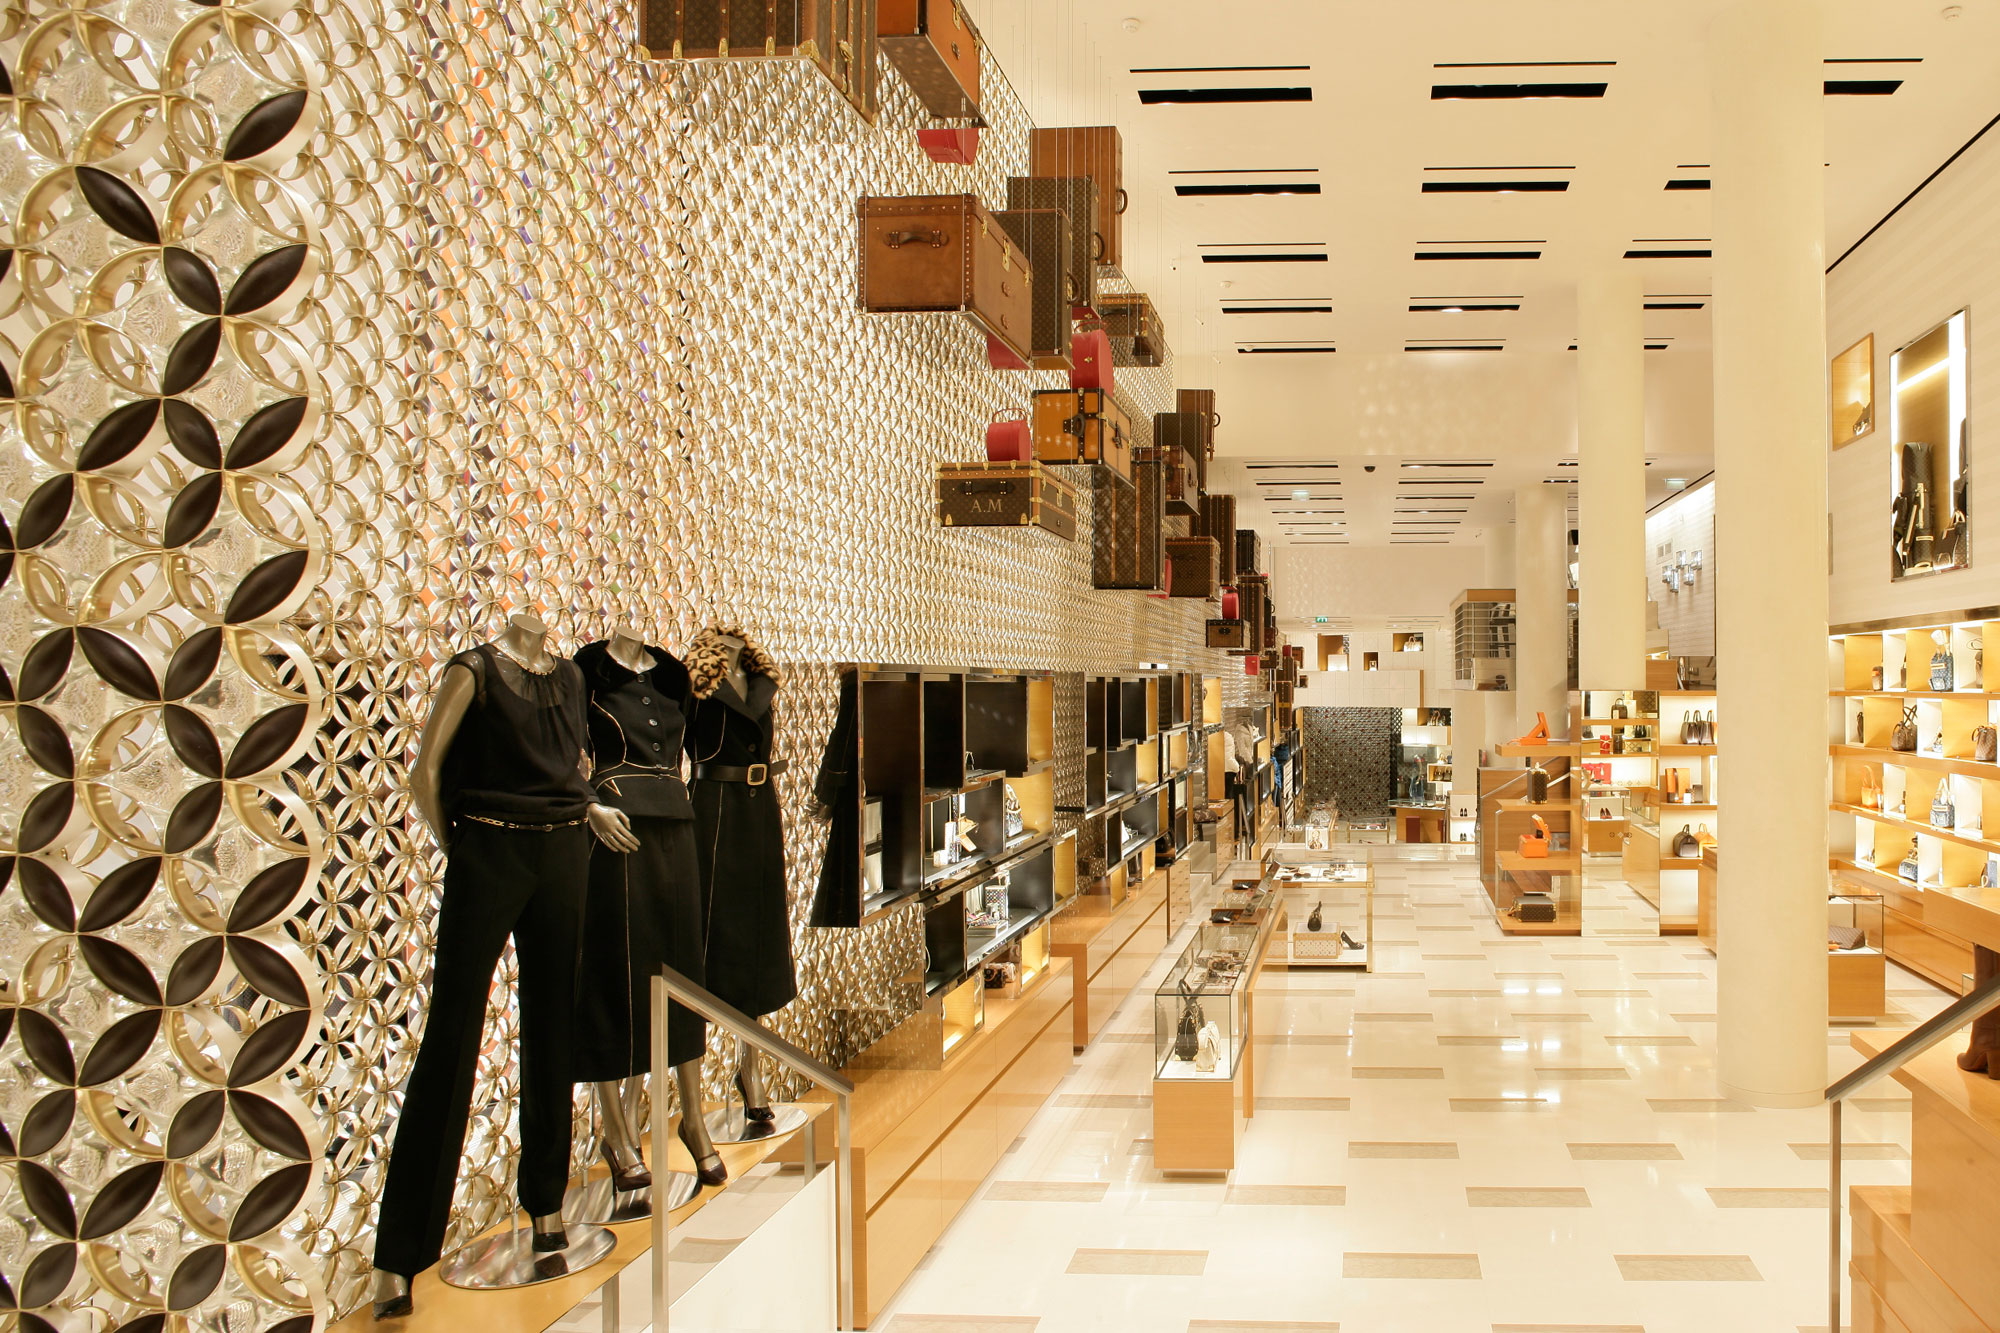 Louis Vuitton Store Champs Elysees Paris | Confederated Tribes of the Umatilla Indian Reservation